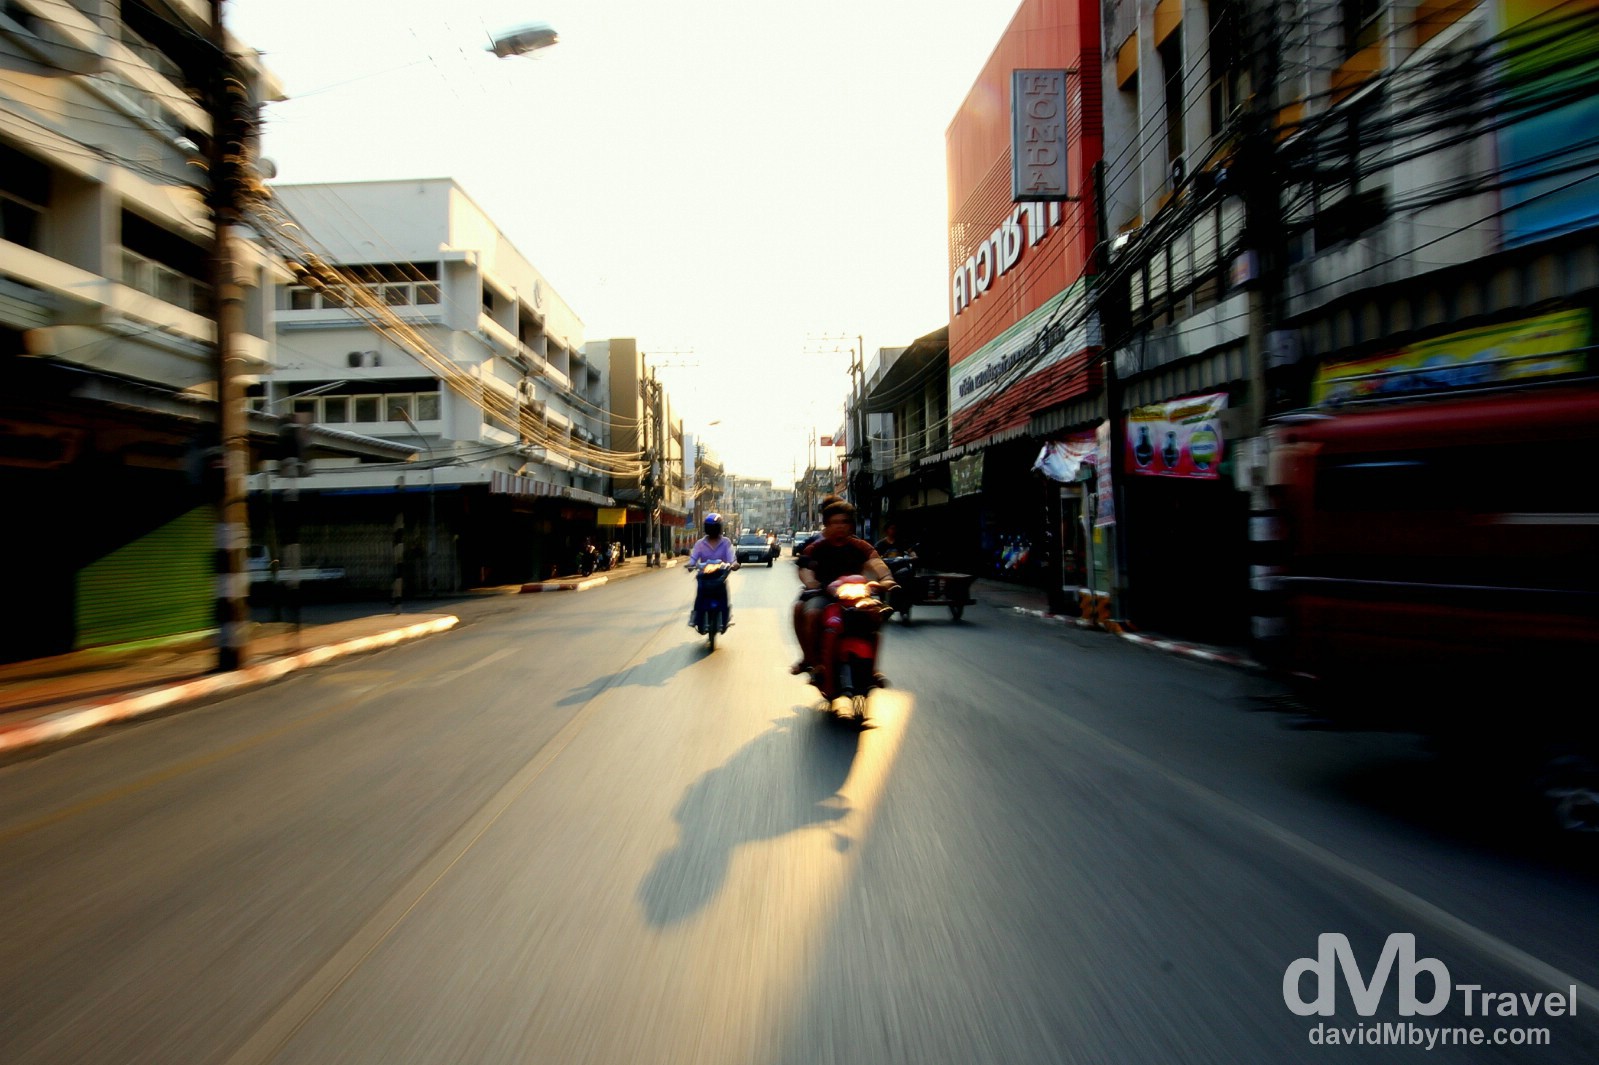 Motion & late afternoon shadows as seen from the back of a moving sawngthaew, an open-backed pick-up that doubles as a taxi, on the way to the Chiang Mai bus station to get the bus to Bangkok. March 15th 2012. on the streets of Chiang Mai, northern Thailand. March 15th 2012 